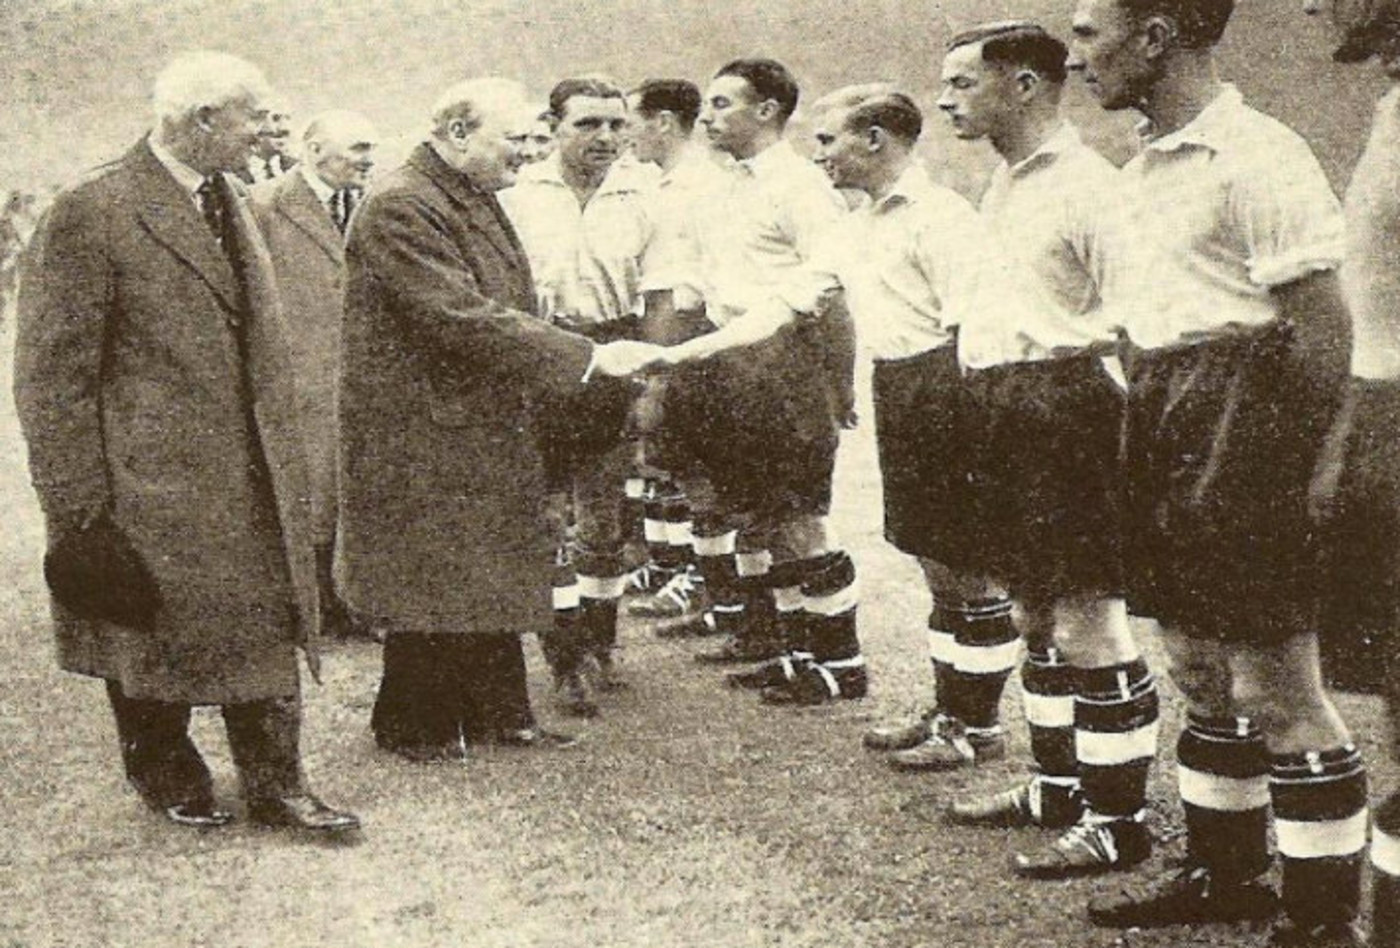 Winston Churchill meeting England players before a game in 1941